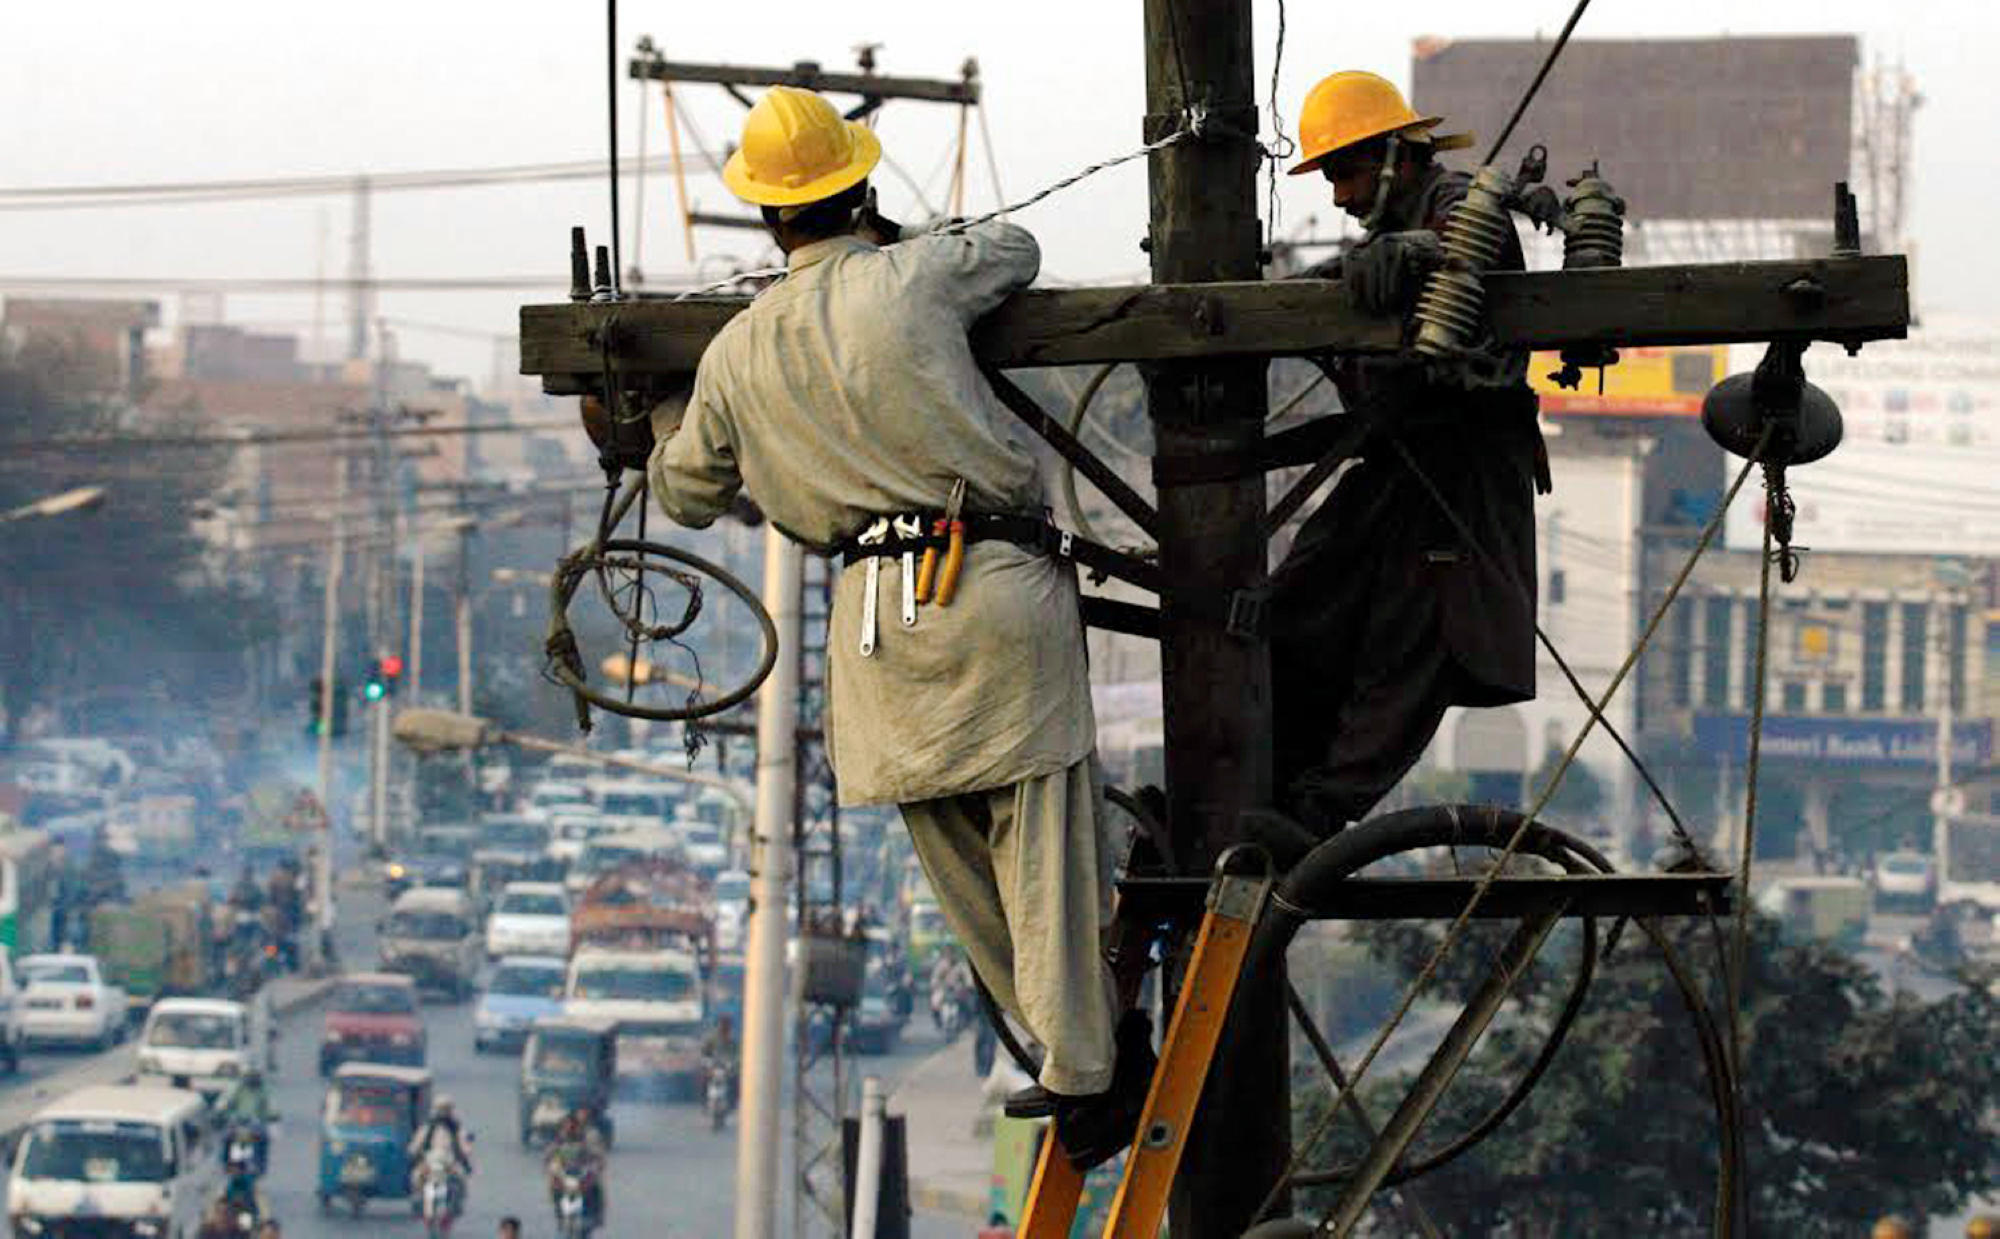 <p> This 2013 photo shows Pakistani technicians fixing an electricity tower in Lahore. Today, the country is in the midst of a debate about the future of its power sector as it confronts huge electricity payments amidst persistent blackouts [Image: Alamy]</p>